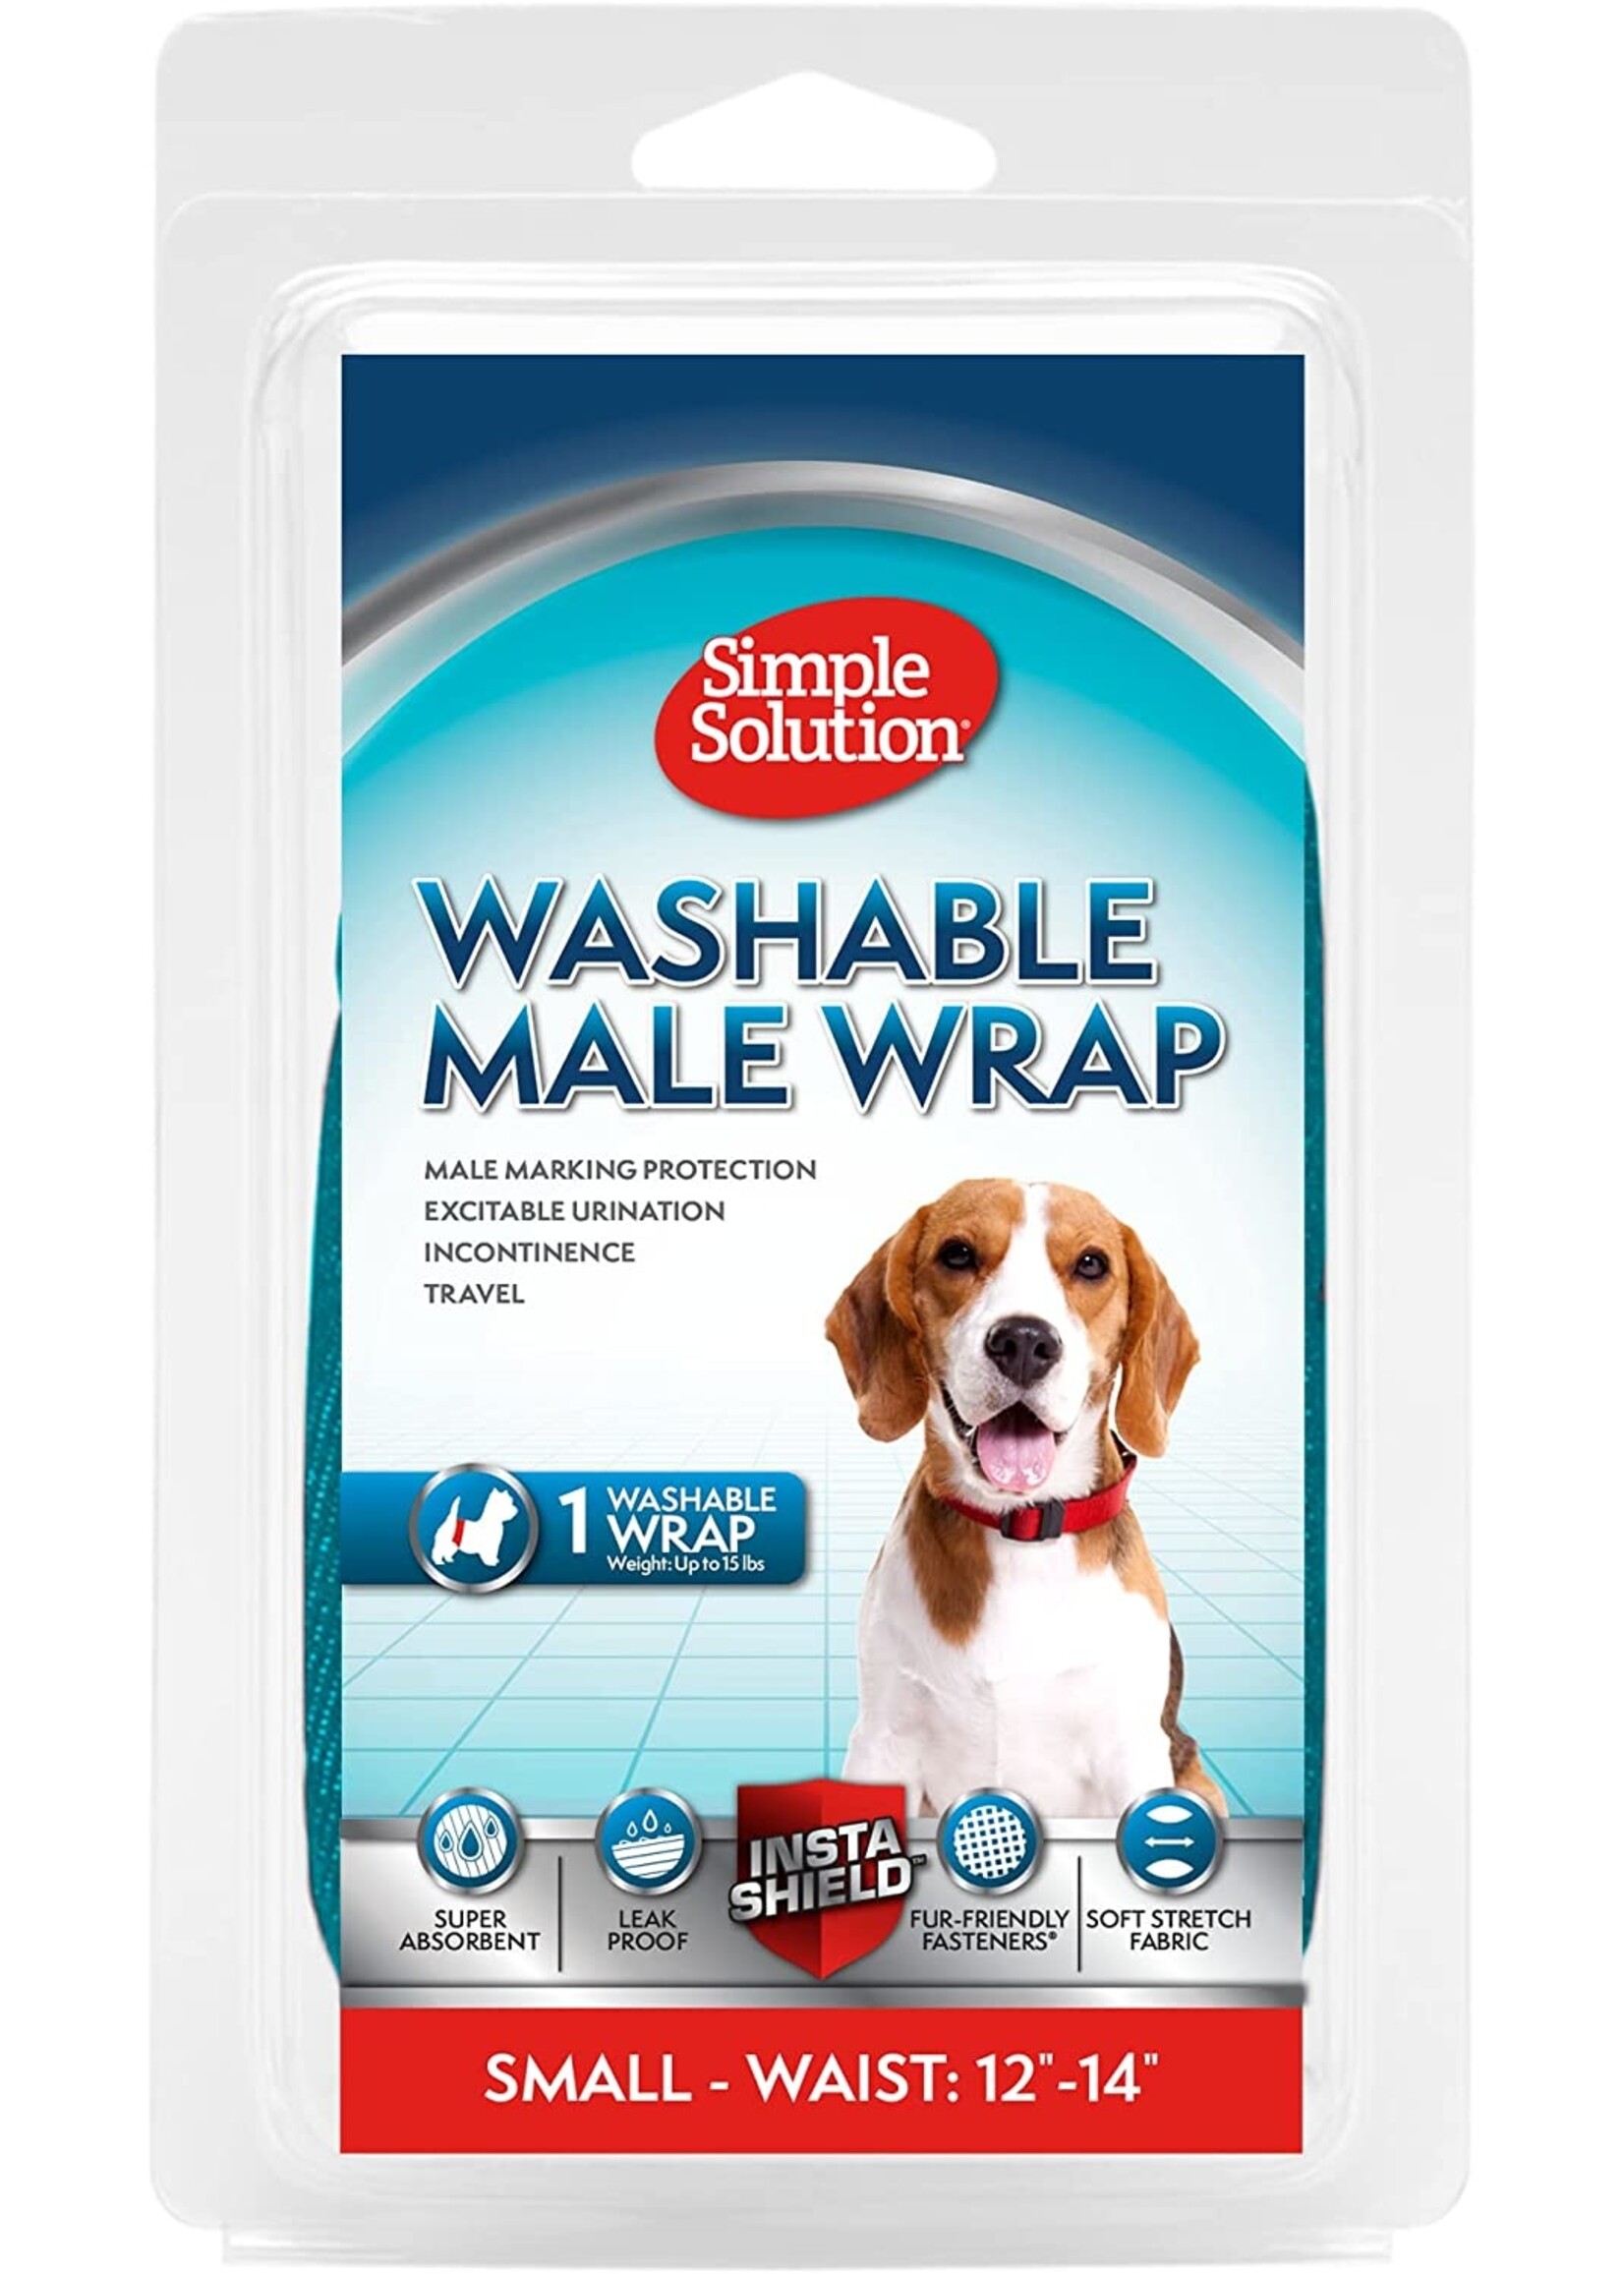 Simple Solutions Simple Solution Washable Male Wrap